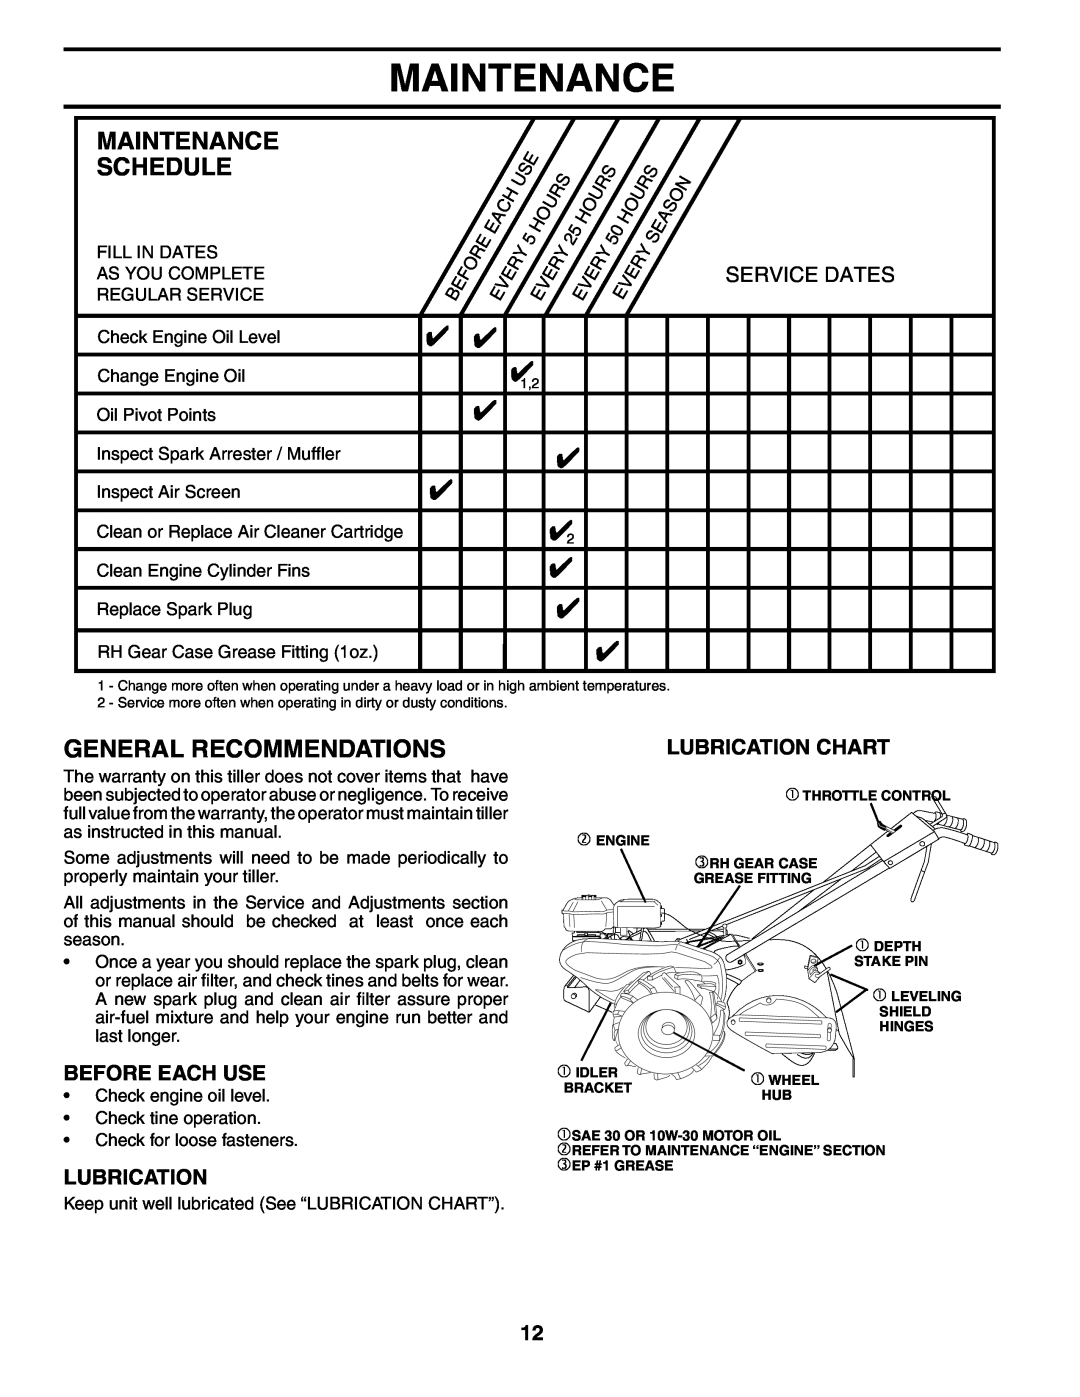 Poulan 190388 Maintenance Schedule, General Recommendations, Before Each Use, Lubrication Chart, Service Dates 